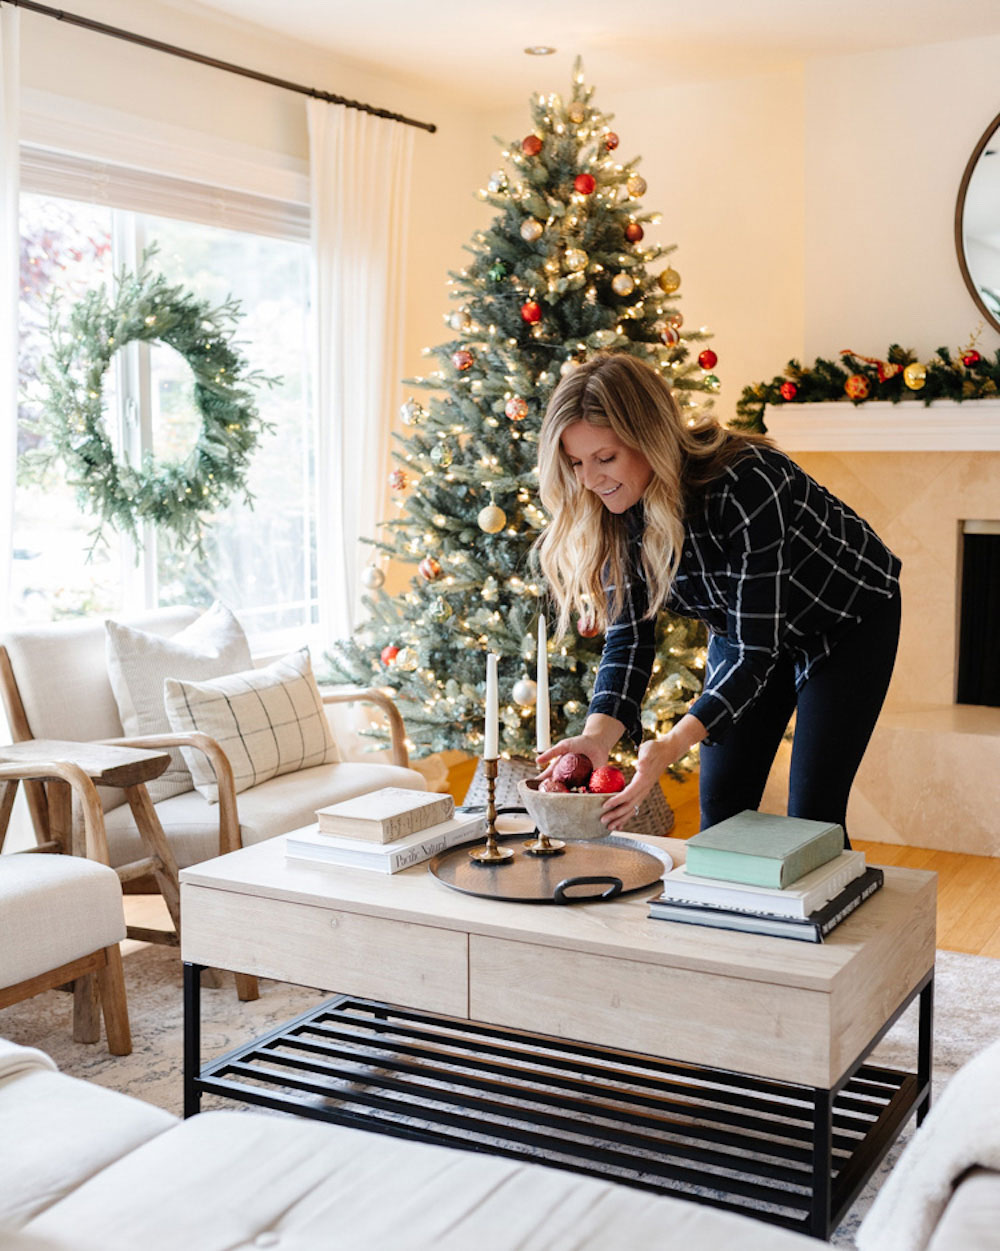 Woman placing bowl on table with Christmas Tree and holiday wreath in the background